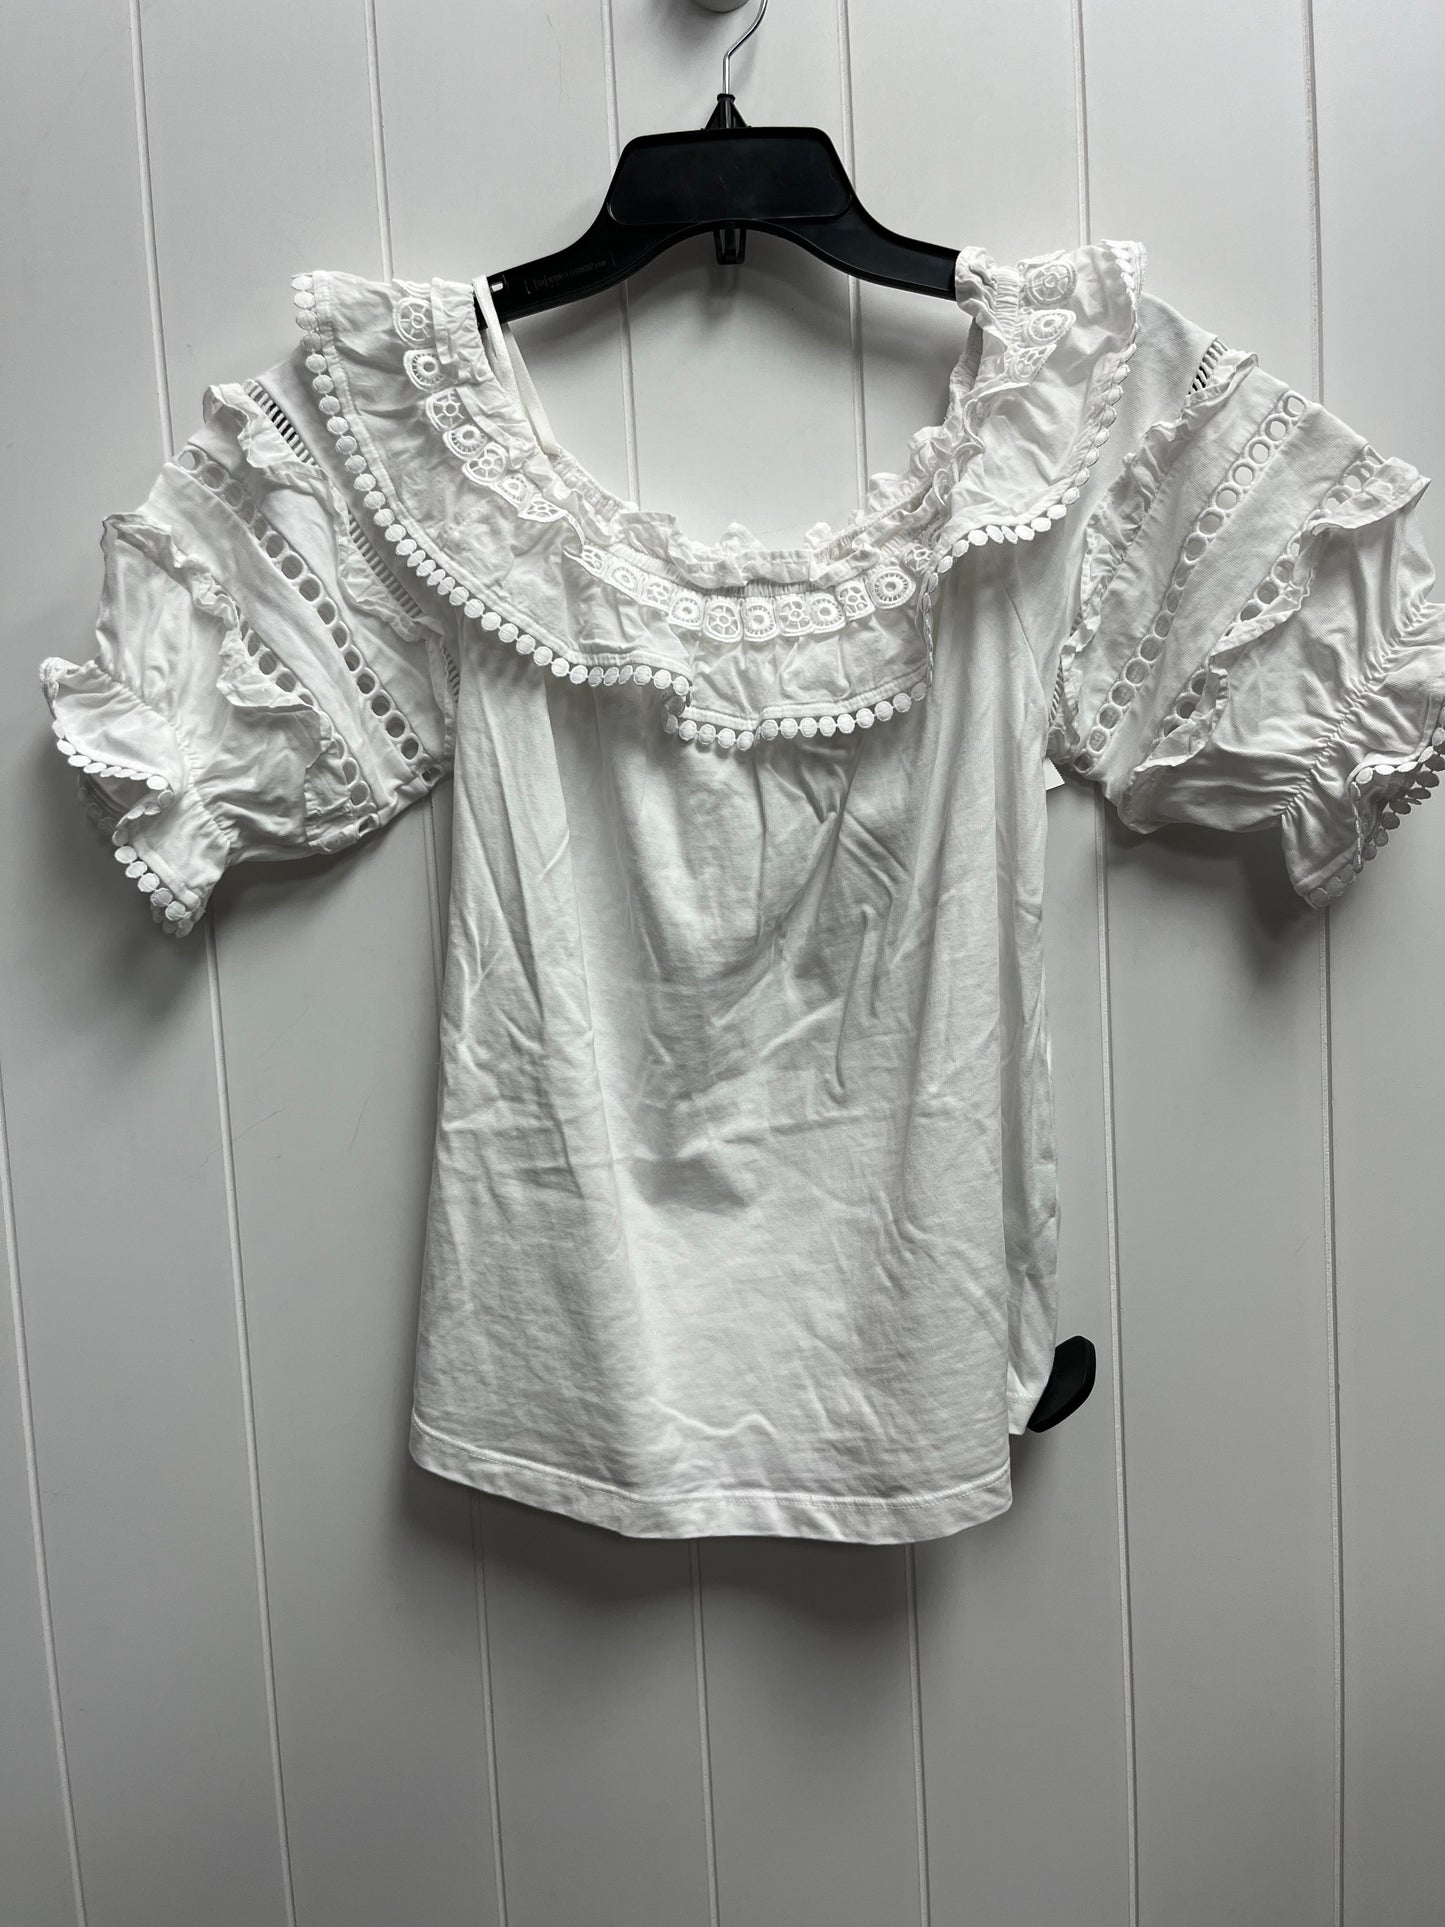 White Top Short Sleeve Lilly Pulitzer, Size S